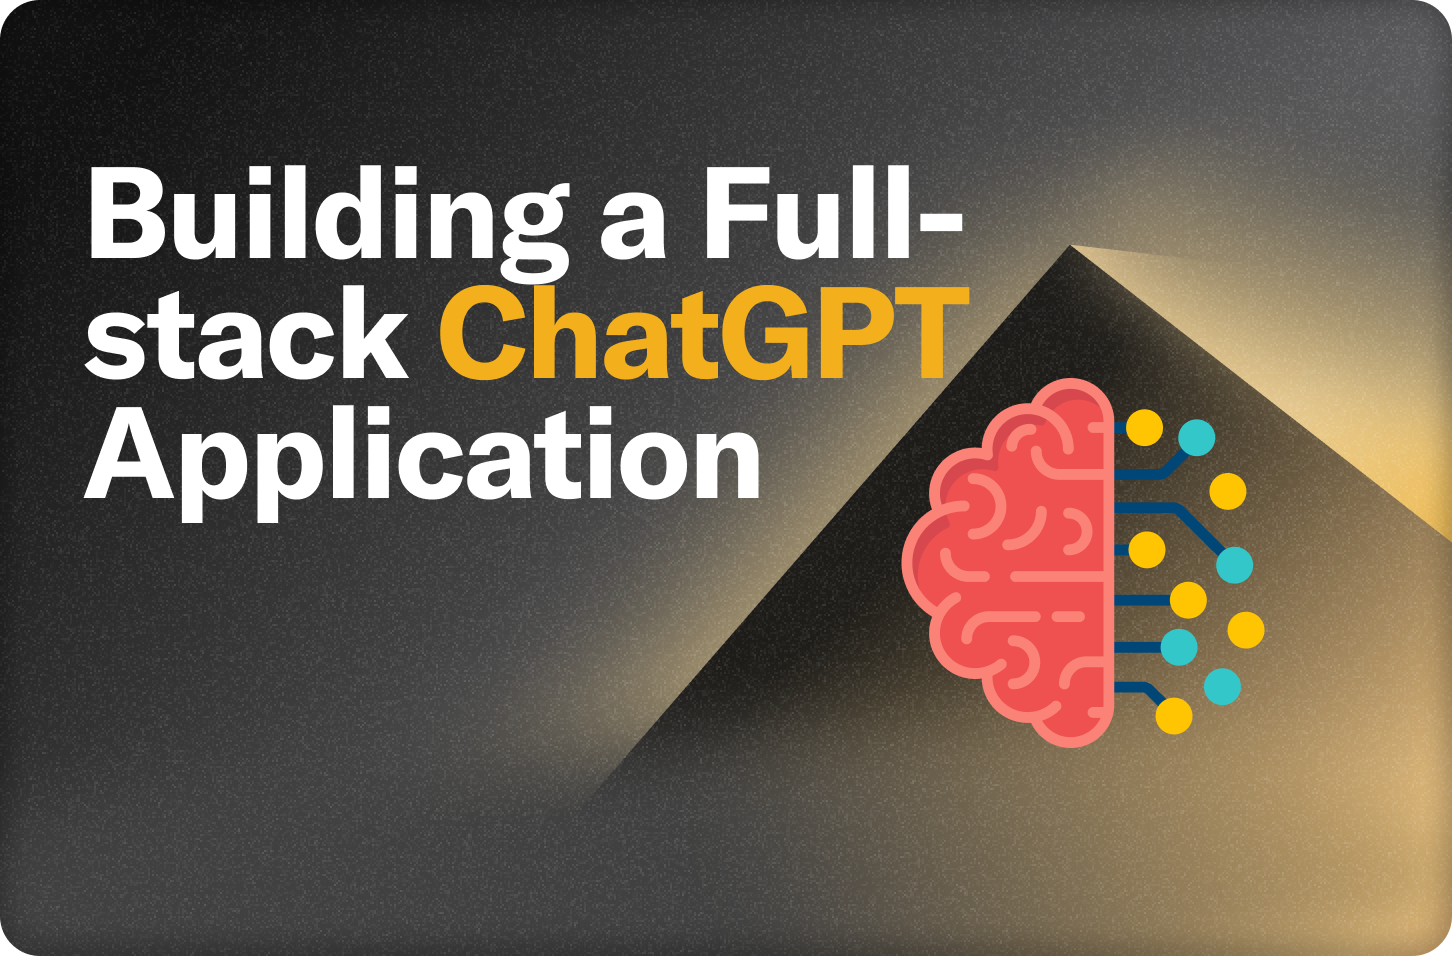 Building a fullstack chat-gpt application